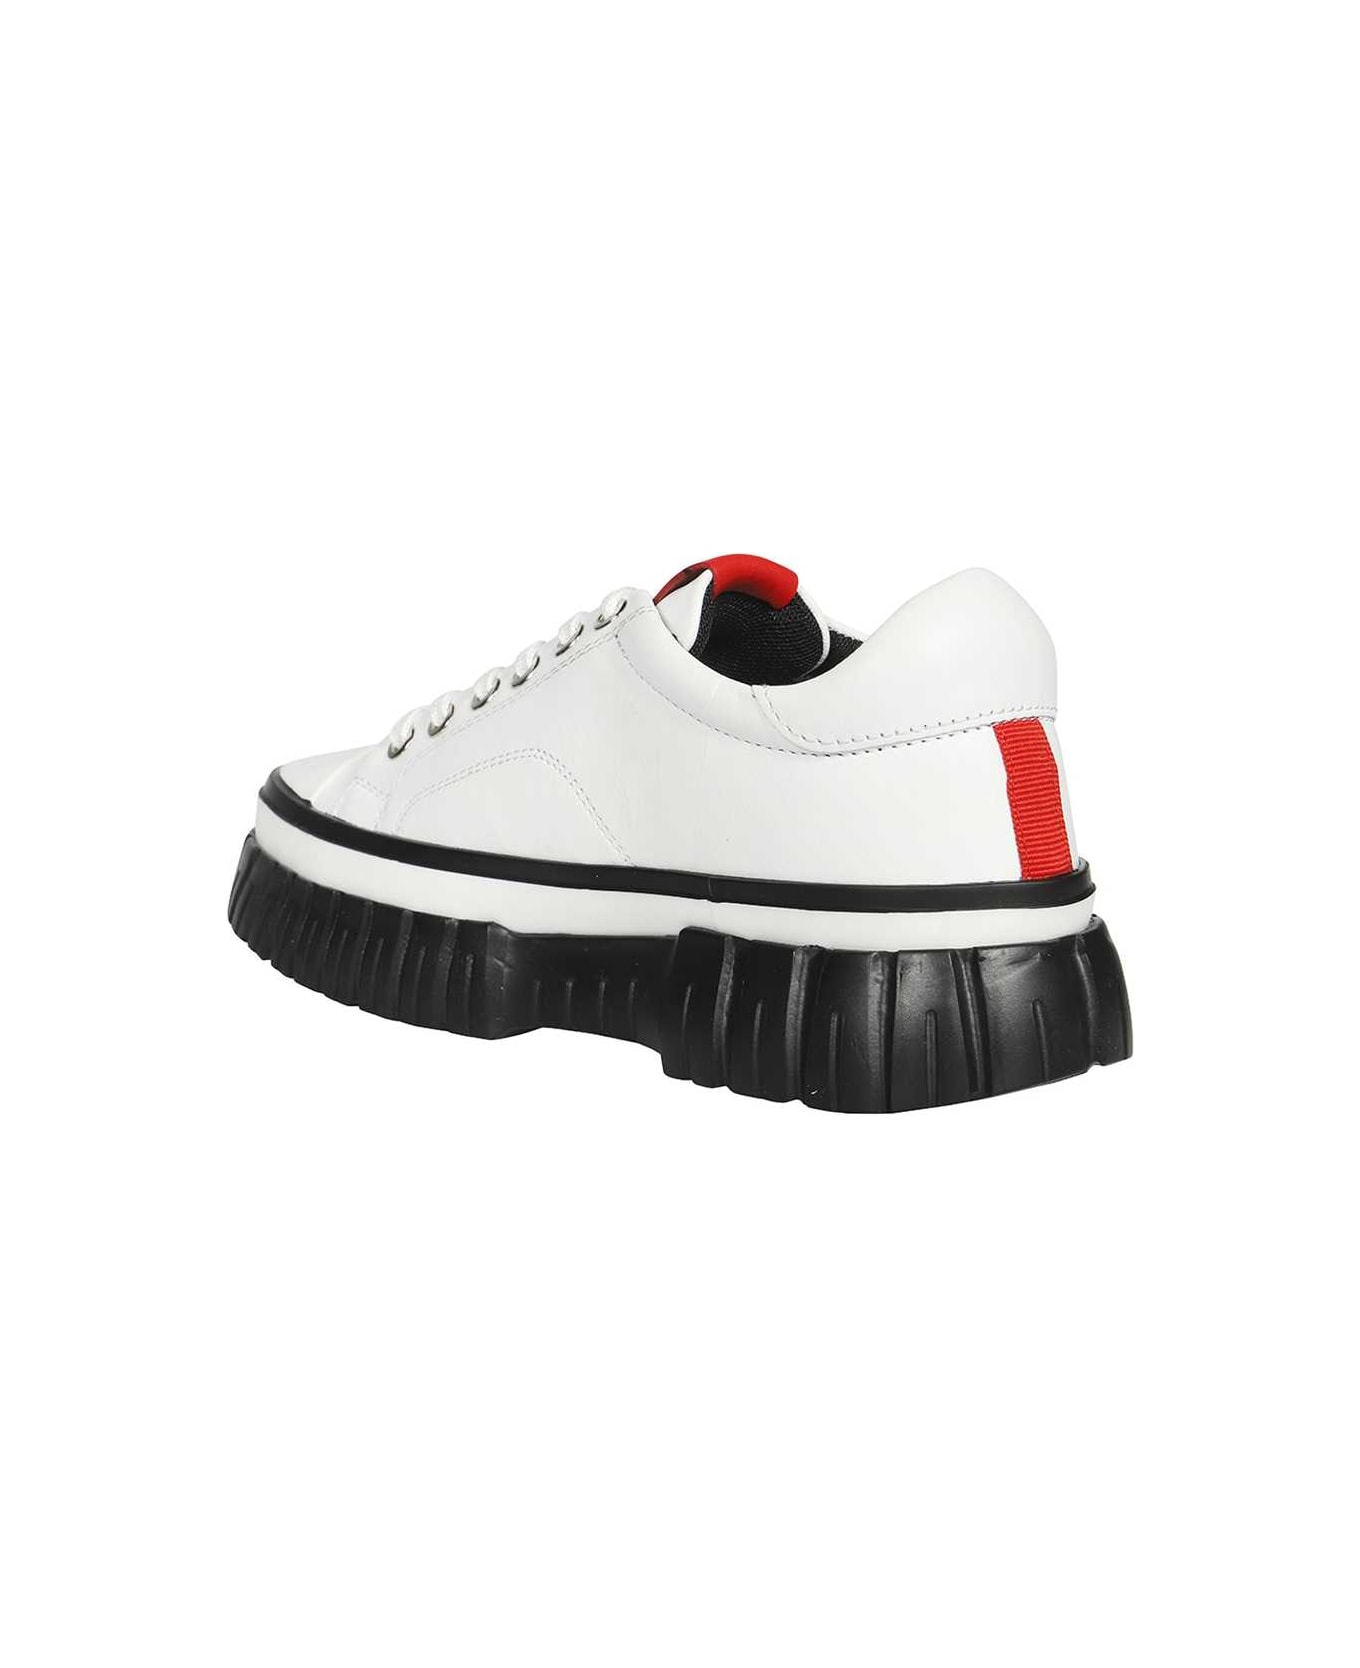 Love Moschino Low-top Sneakers - White